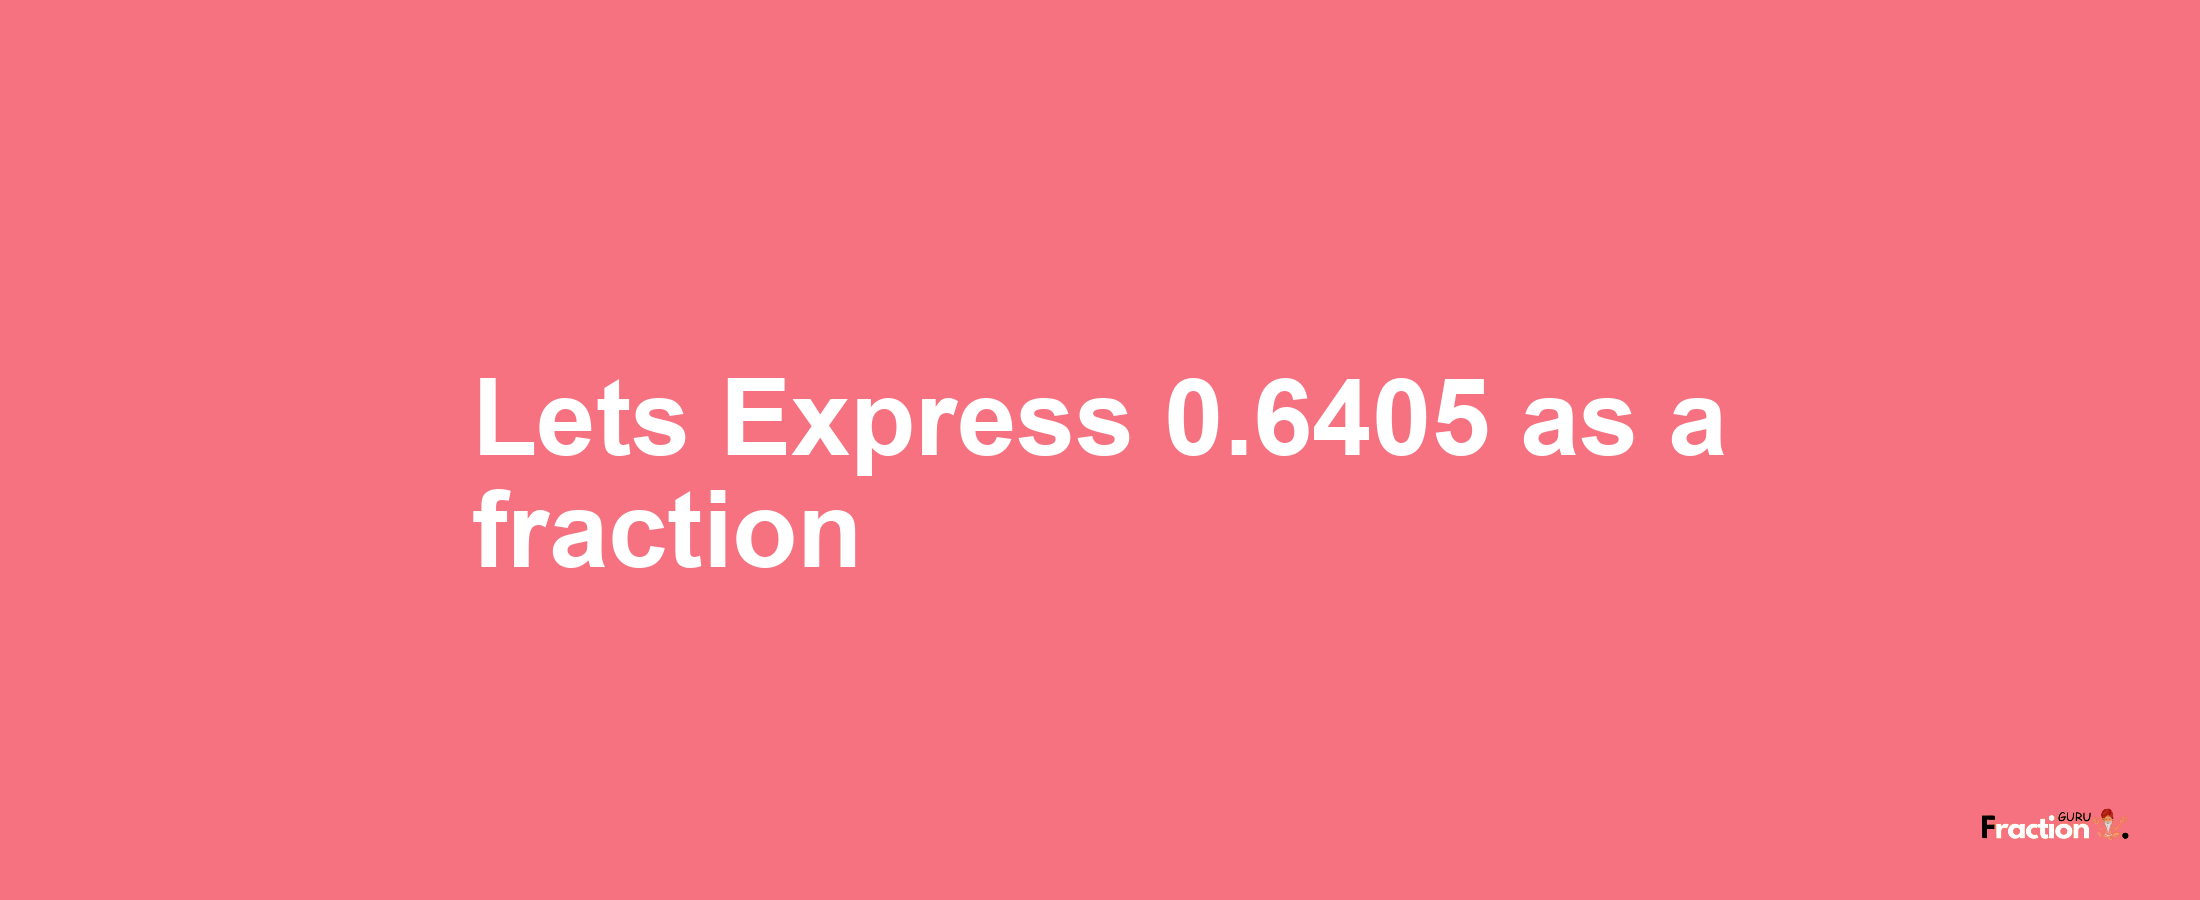 Lets Express 0.6405 as afraction